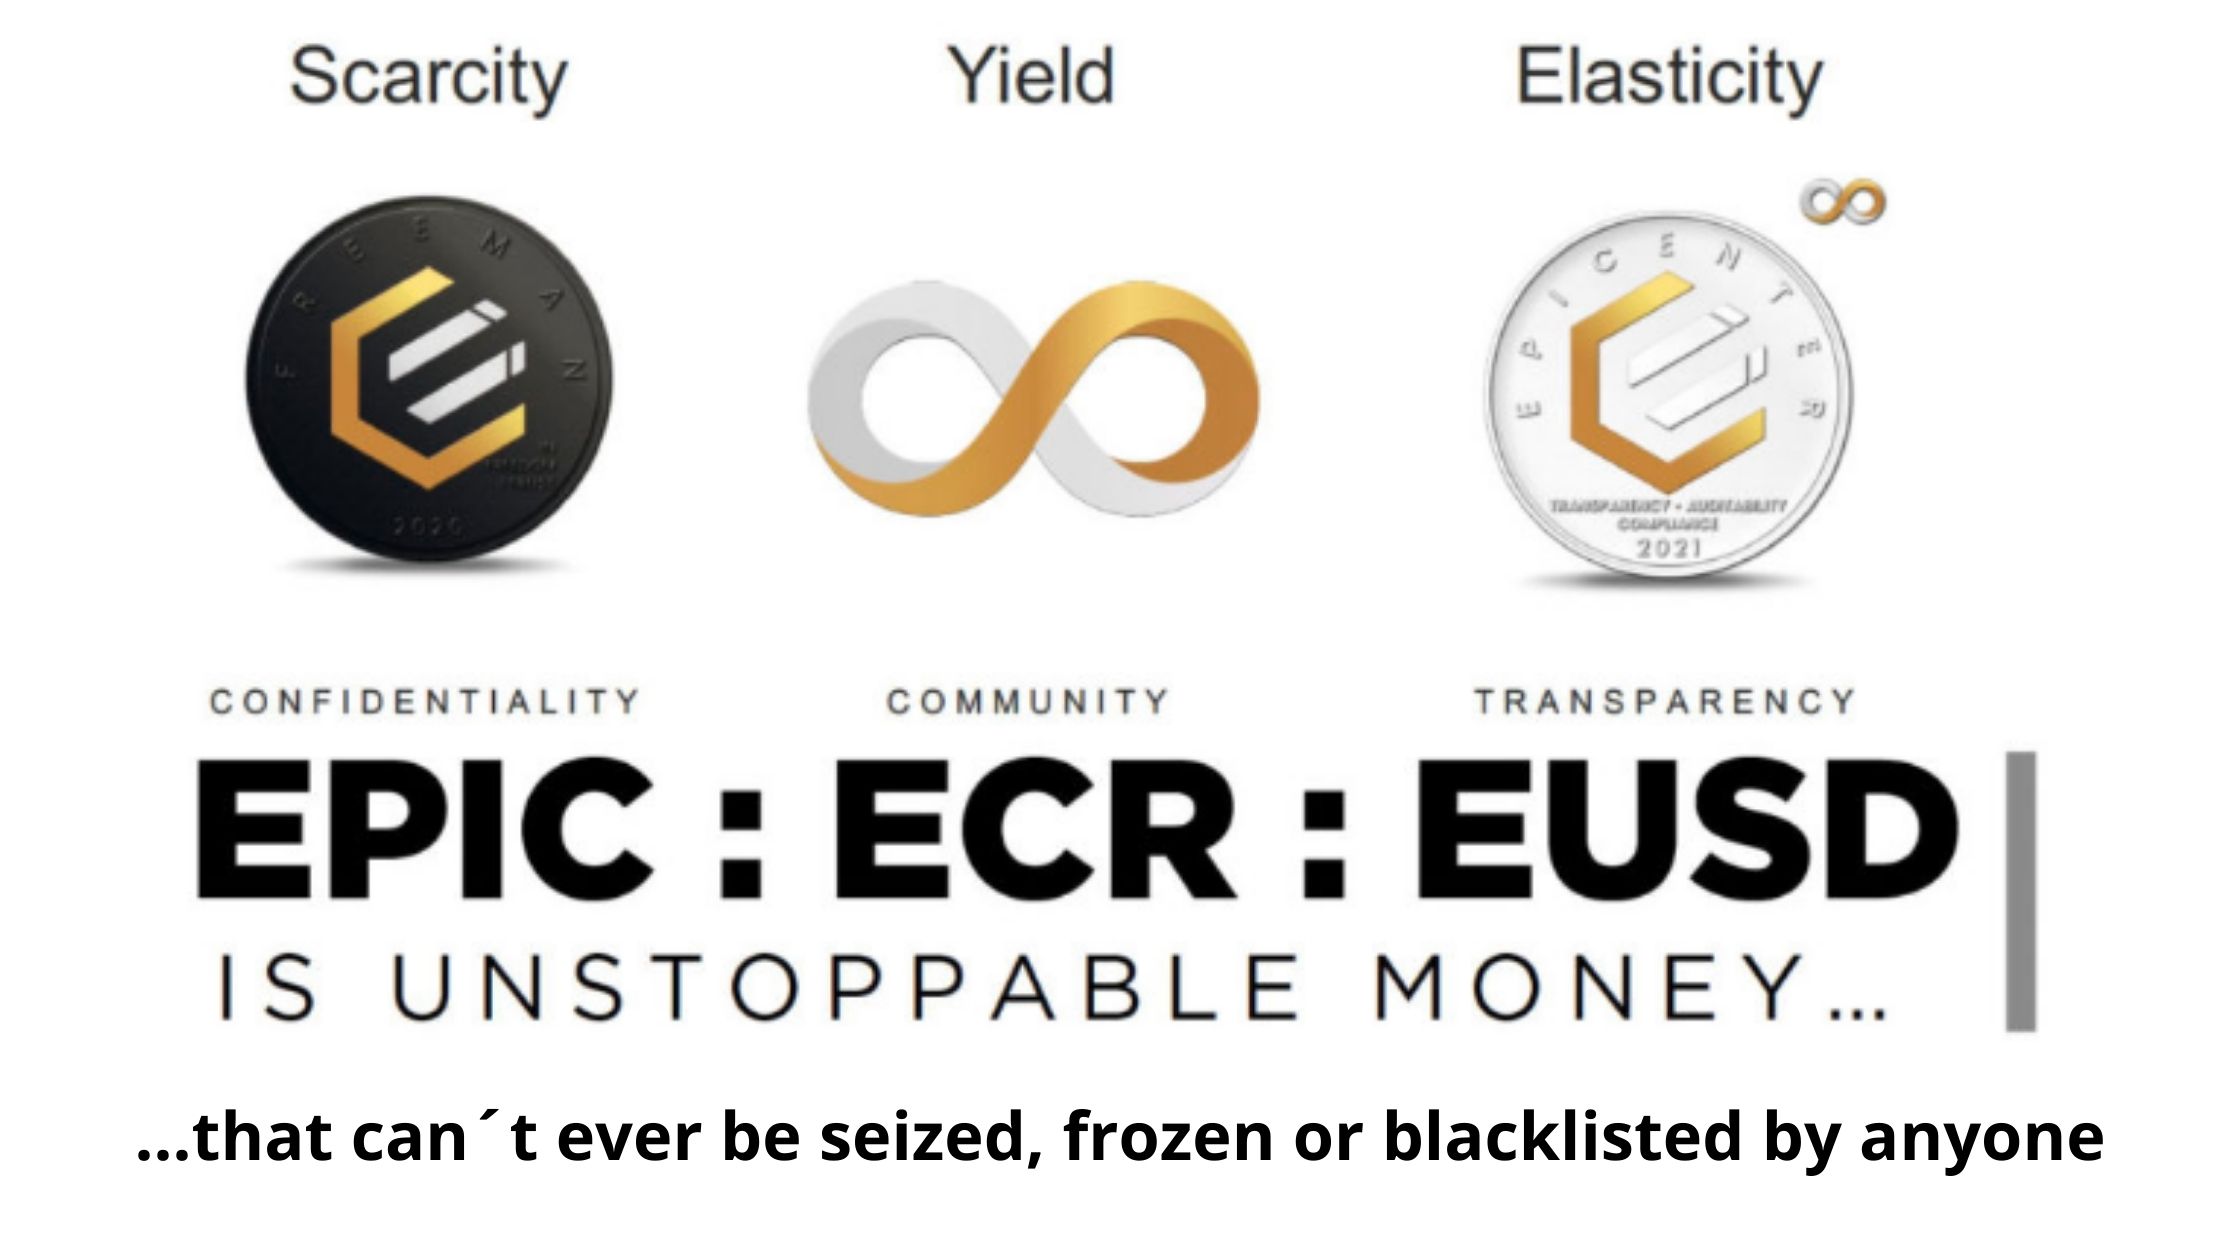 What is Epic CASH